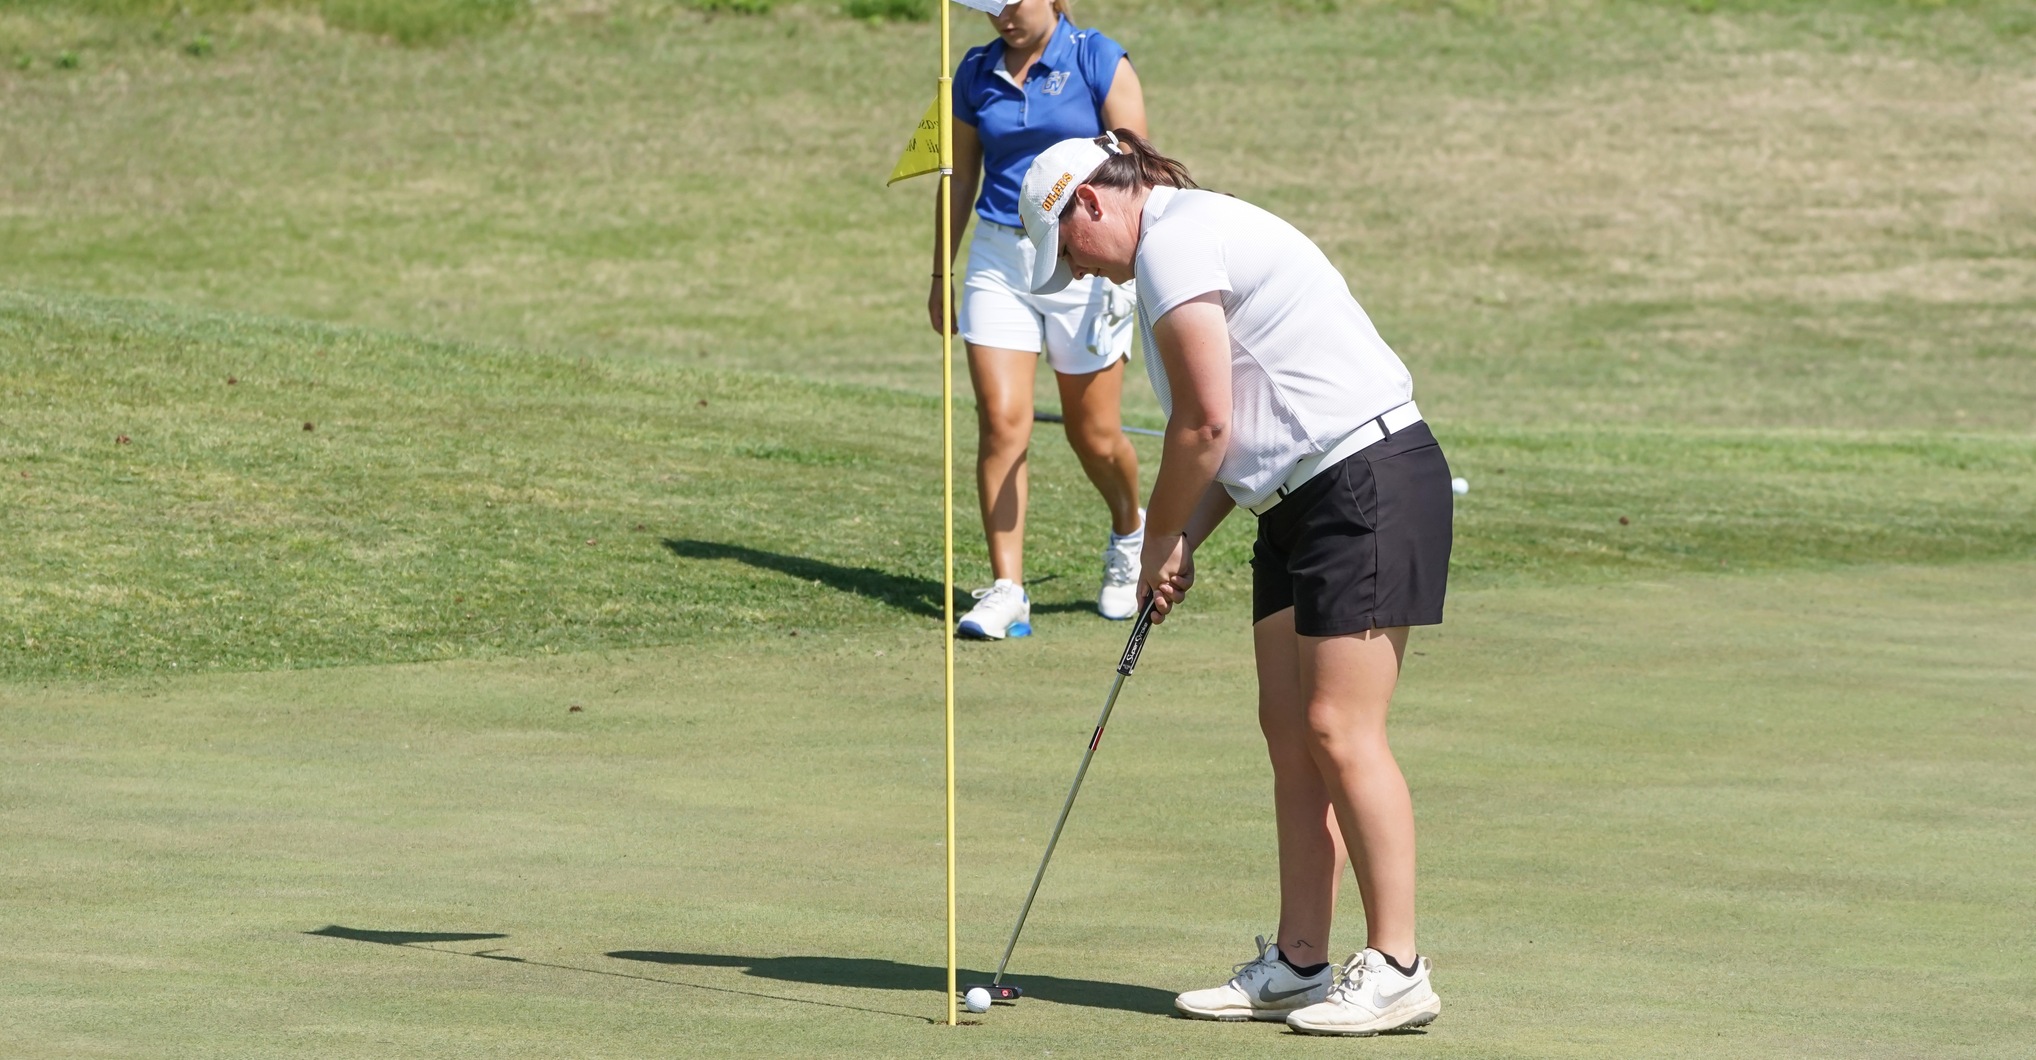 Meredith Wipper taps in for birdie on the par-three, 12th hole in the second round of the NCAA DII East Regional